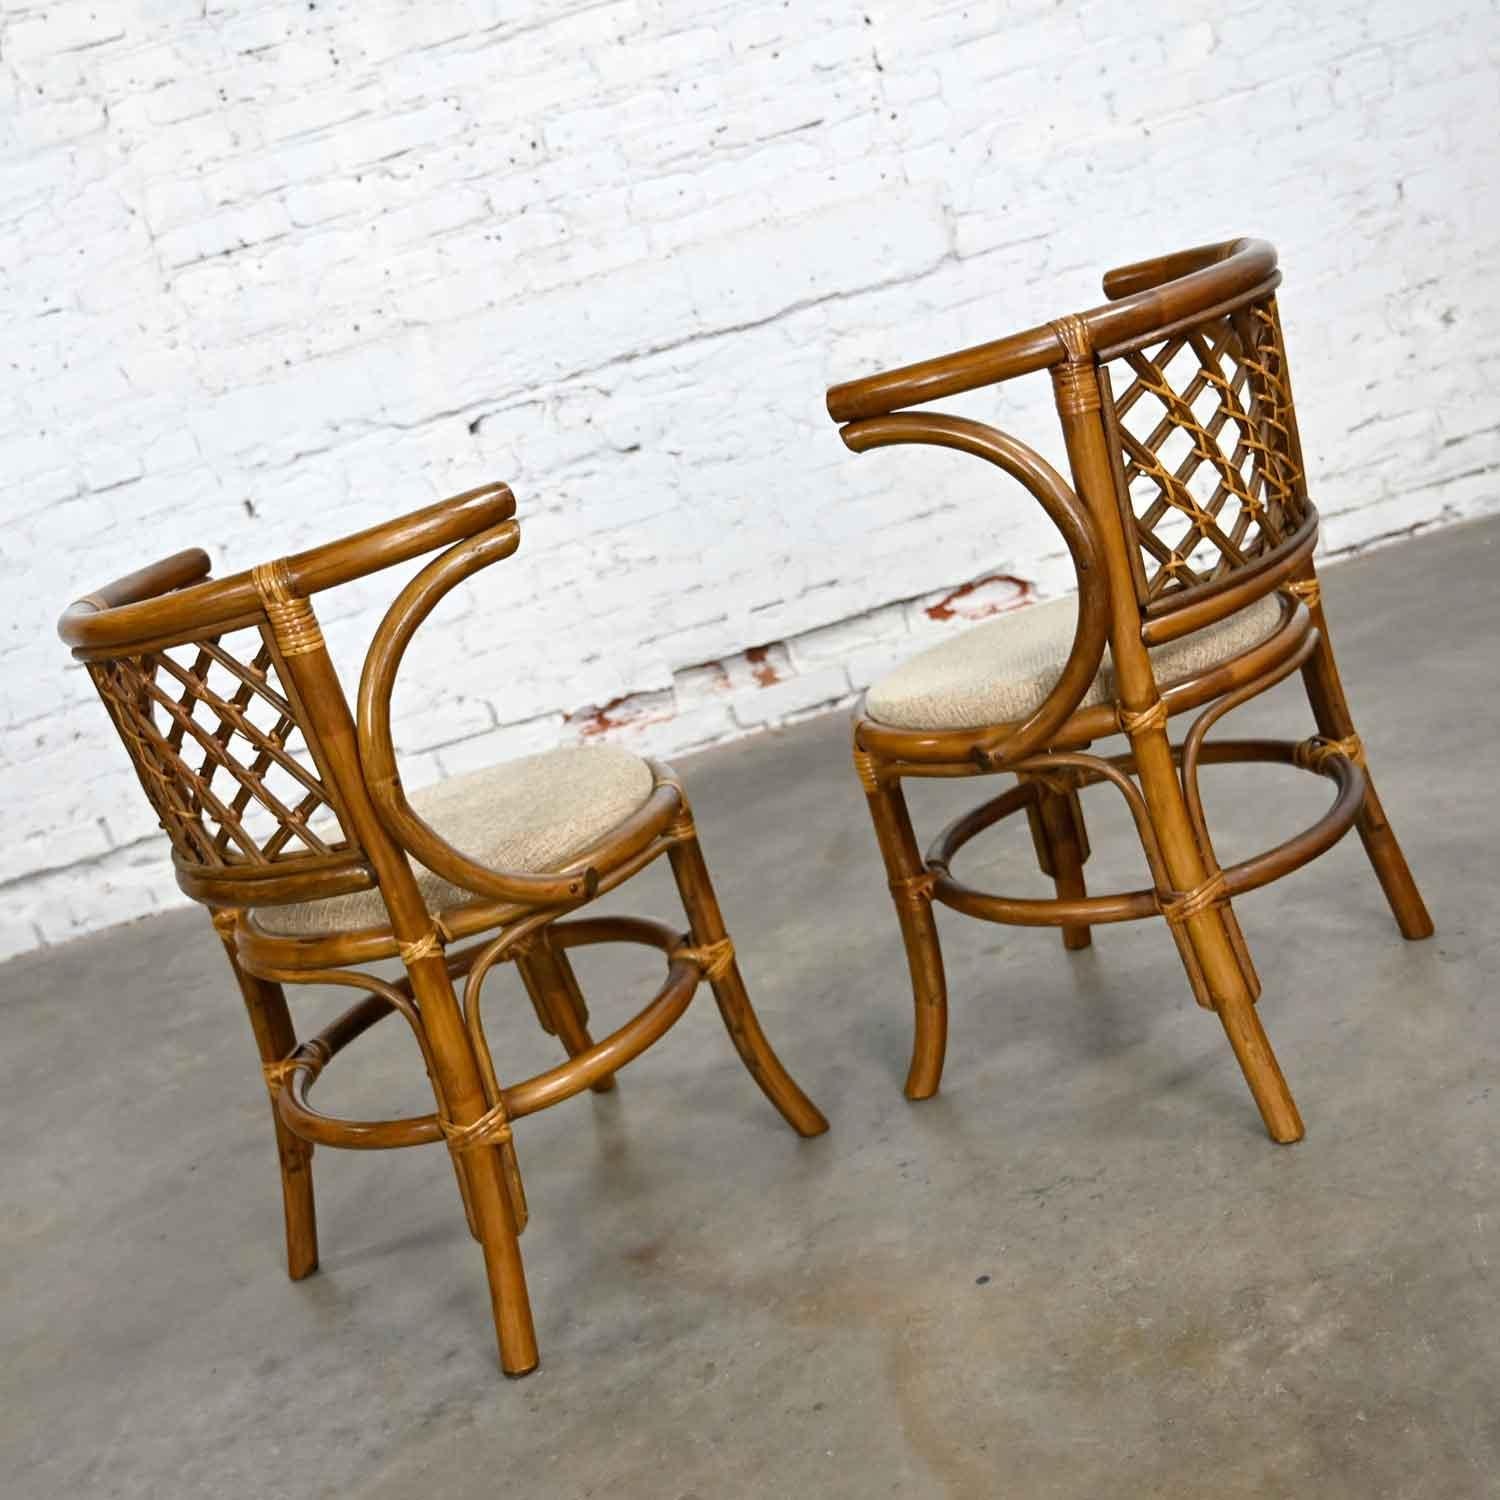 20th Century Vintage Rattan & Cane Pair of Side Chairs Woven Diamond Yoke Back Off-White Twee